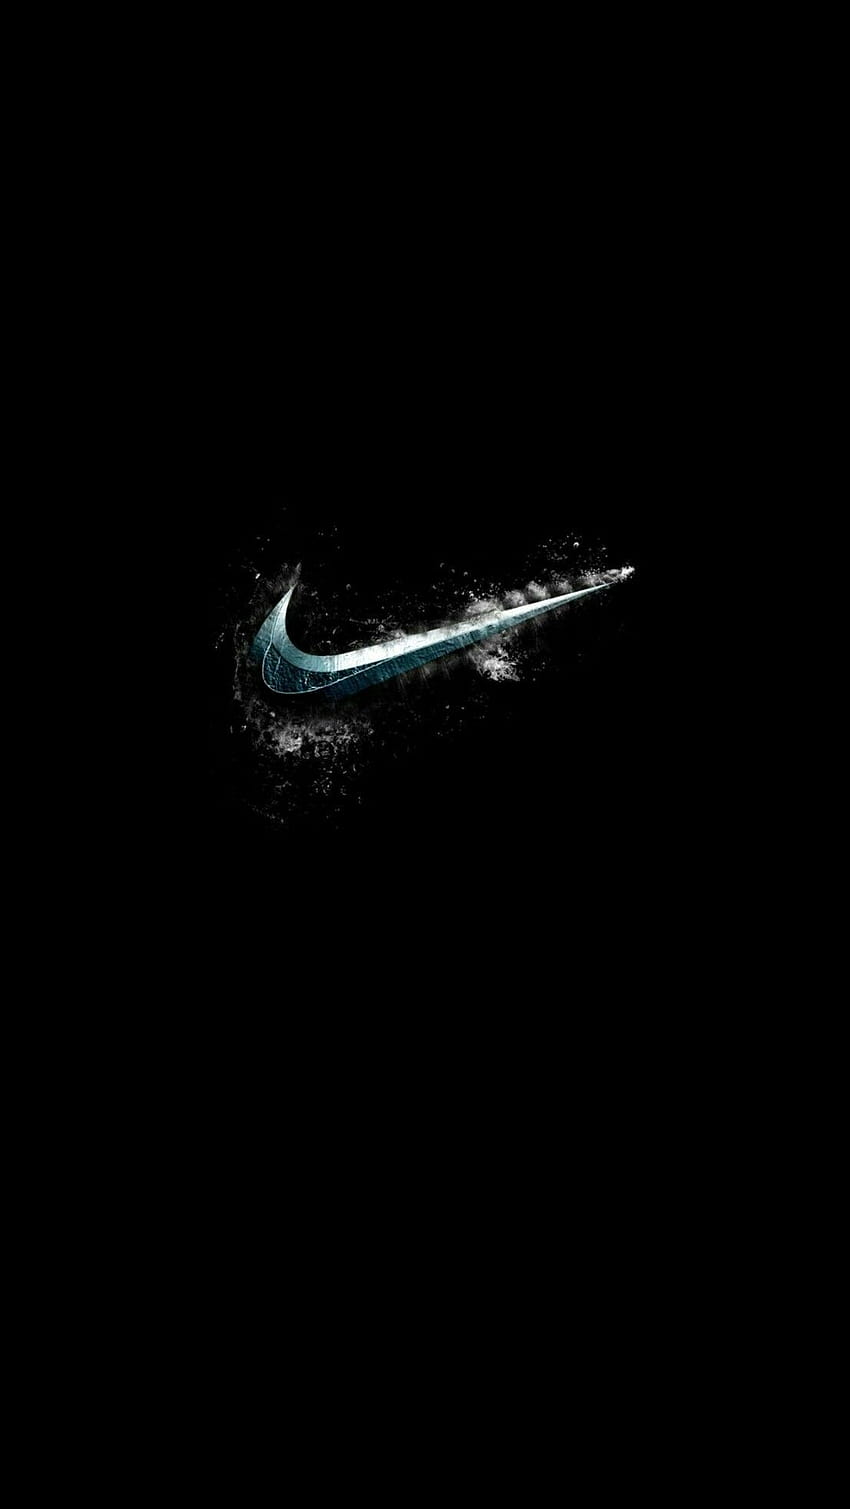 Wallpaper For Phone Nike Wallpaper Apple Wallpaper Wallpaper Backgrounds  Wallpapers Android Iphone 7 Apple Iphone Wall Papers Samsung